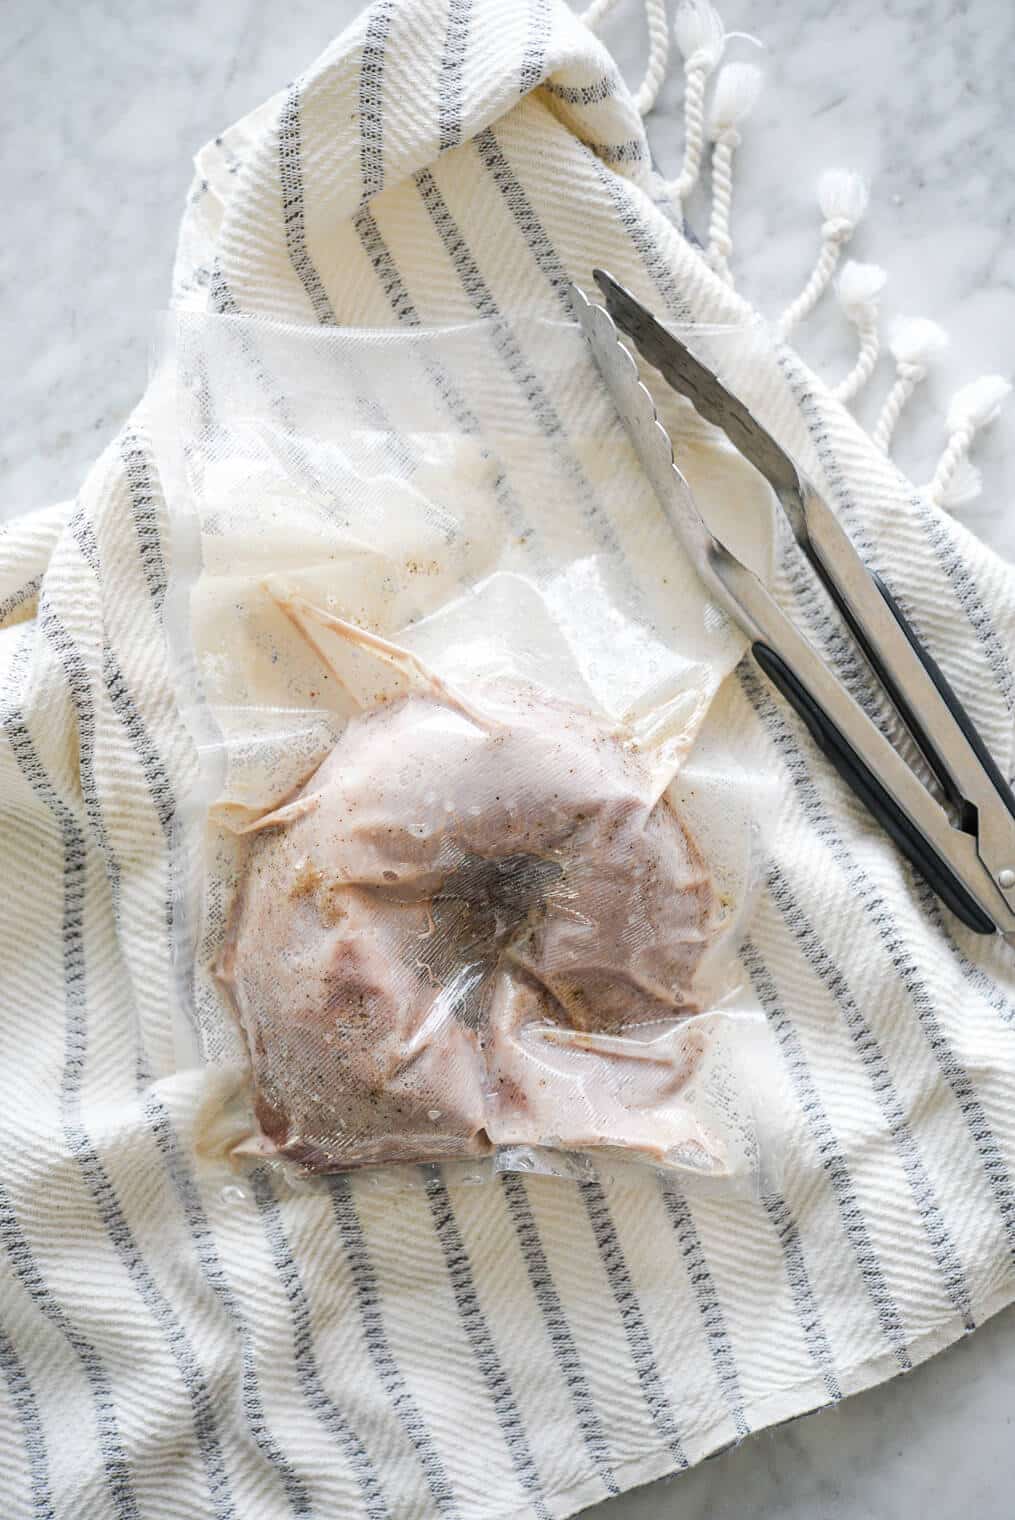 Pork tenderloin in a vacuum sealed bag sitting next to a pair of tongs on top of a white and blue striped towel.